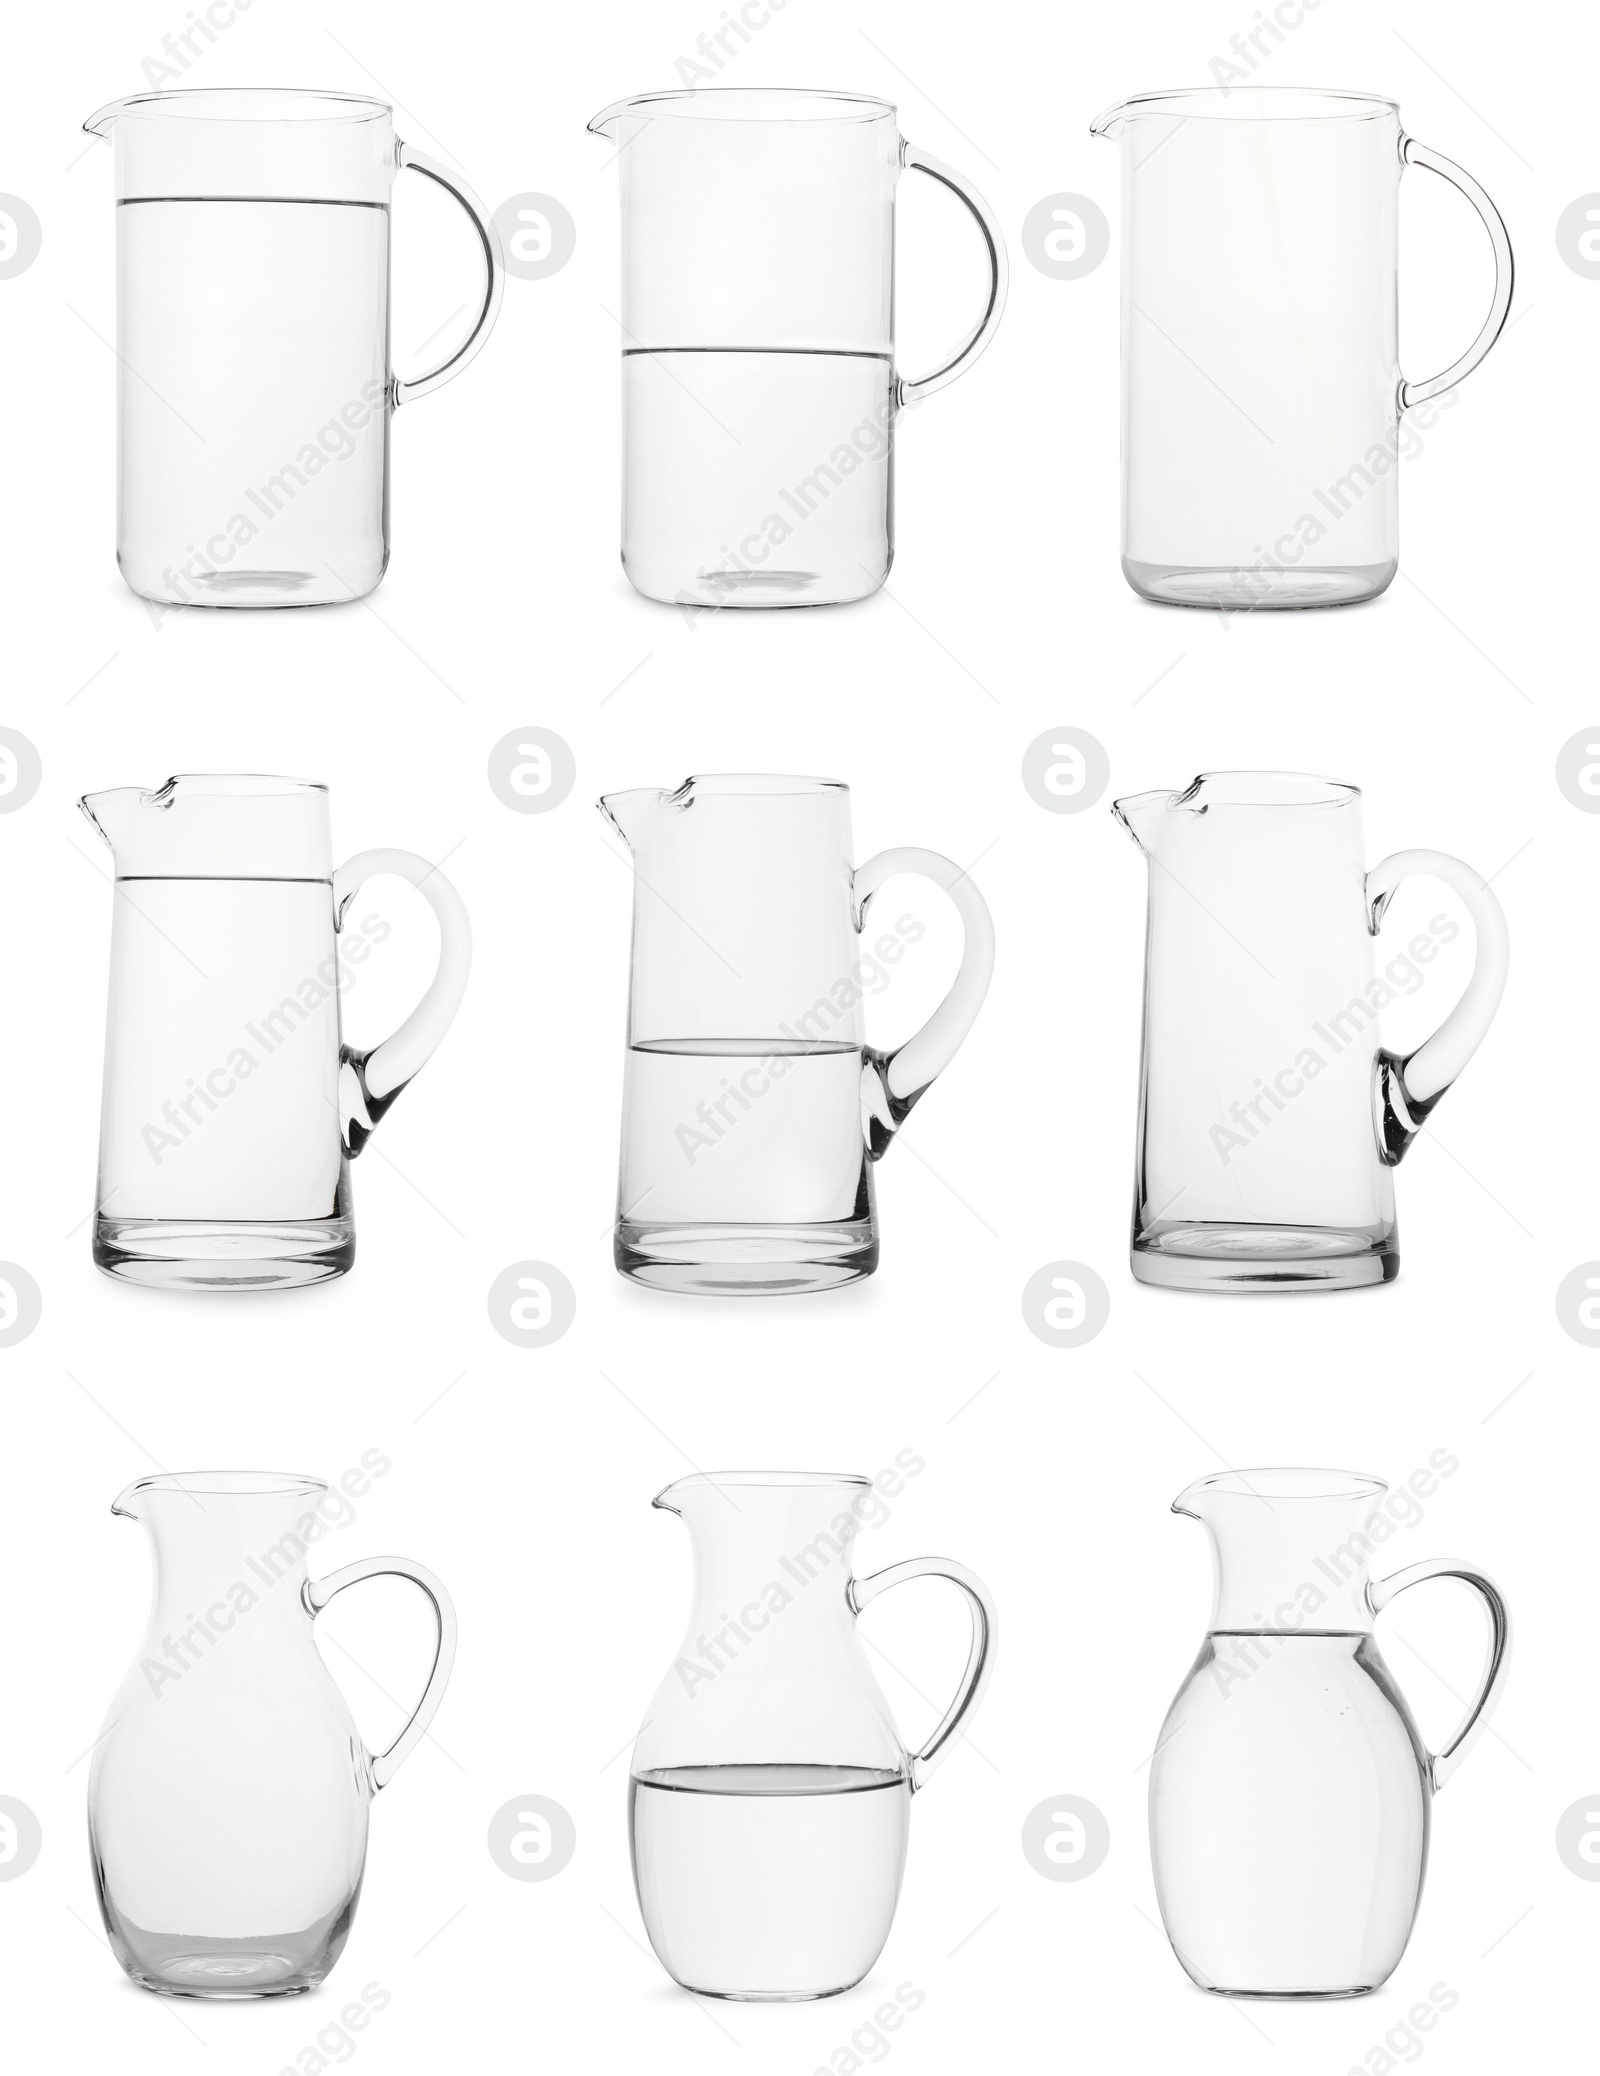 Image of Glass jugs isolated on white, collage with empty, semi filled and full